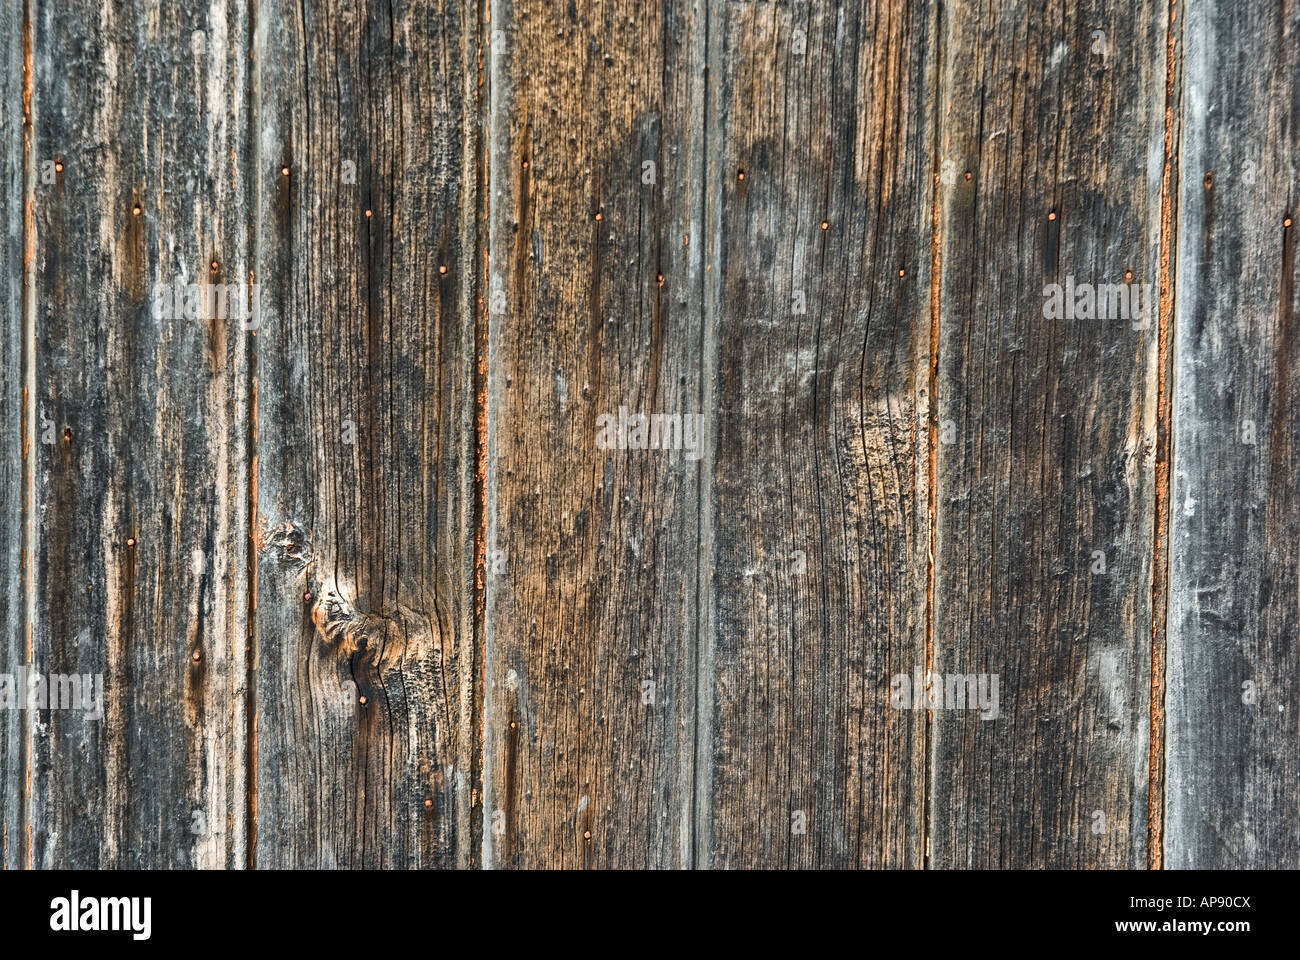 dark dirty and grungy fence panels make a wooden background Stock Photo